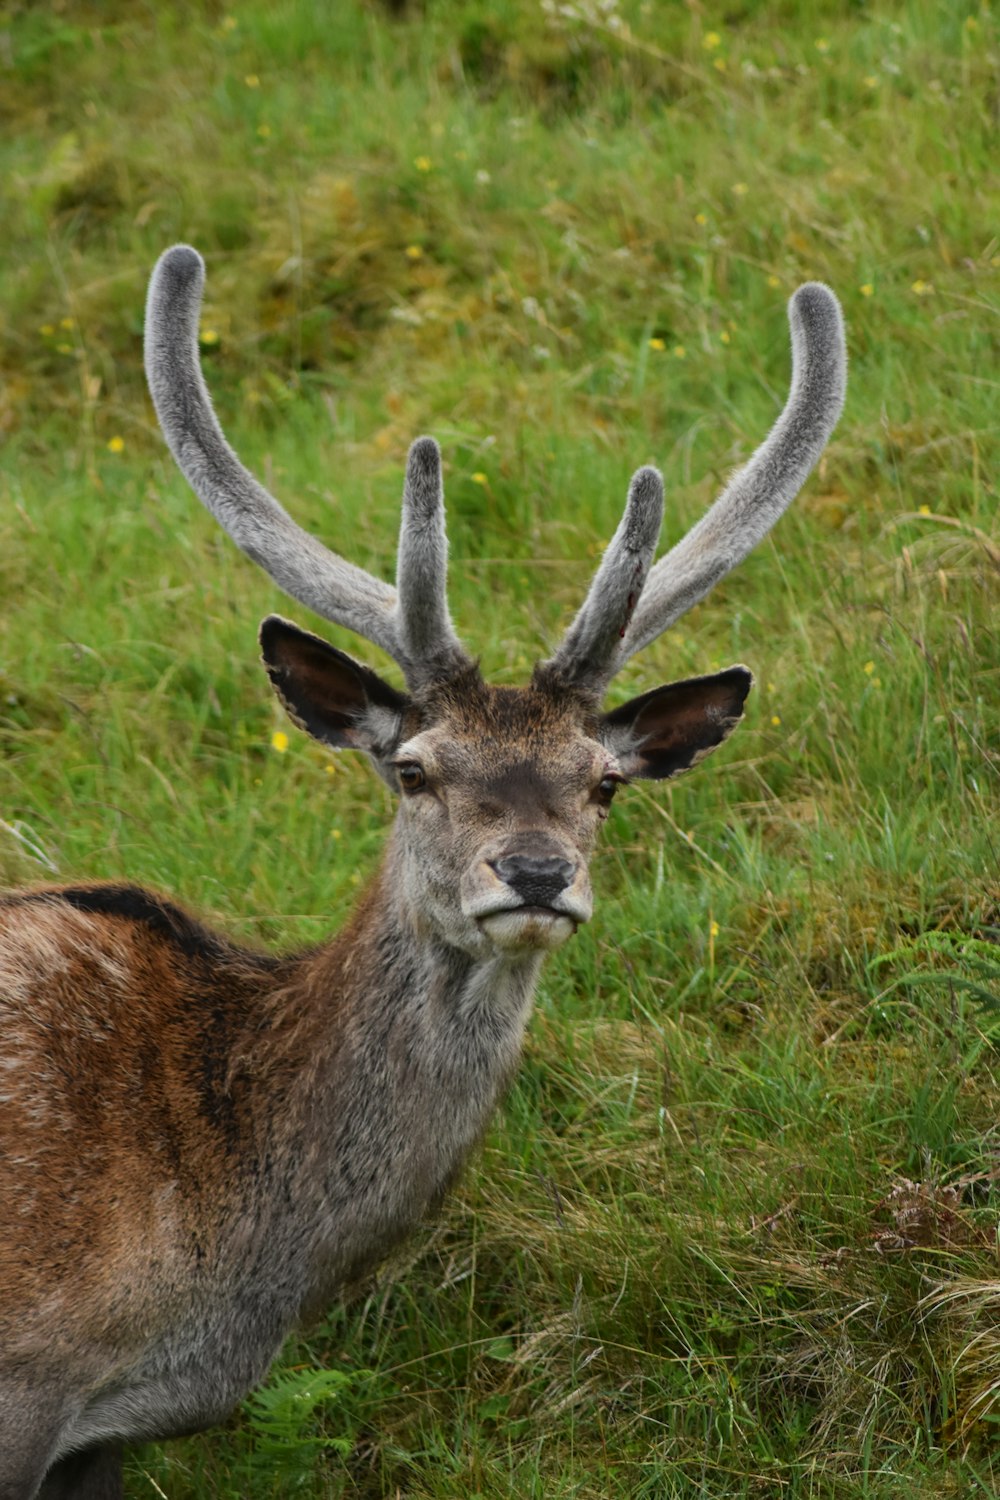 a deer with antlers in a grassy area